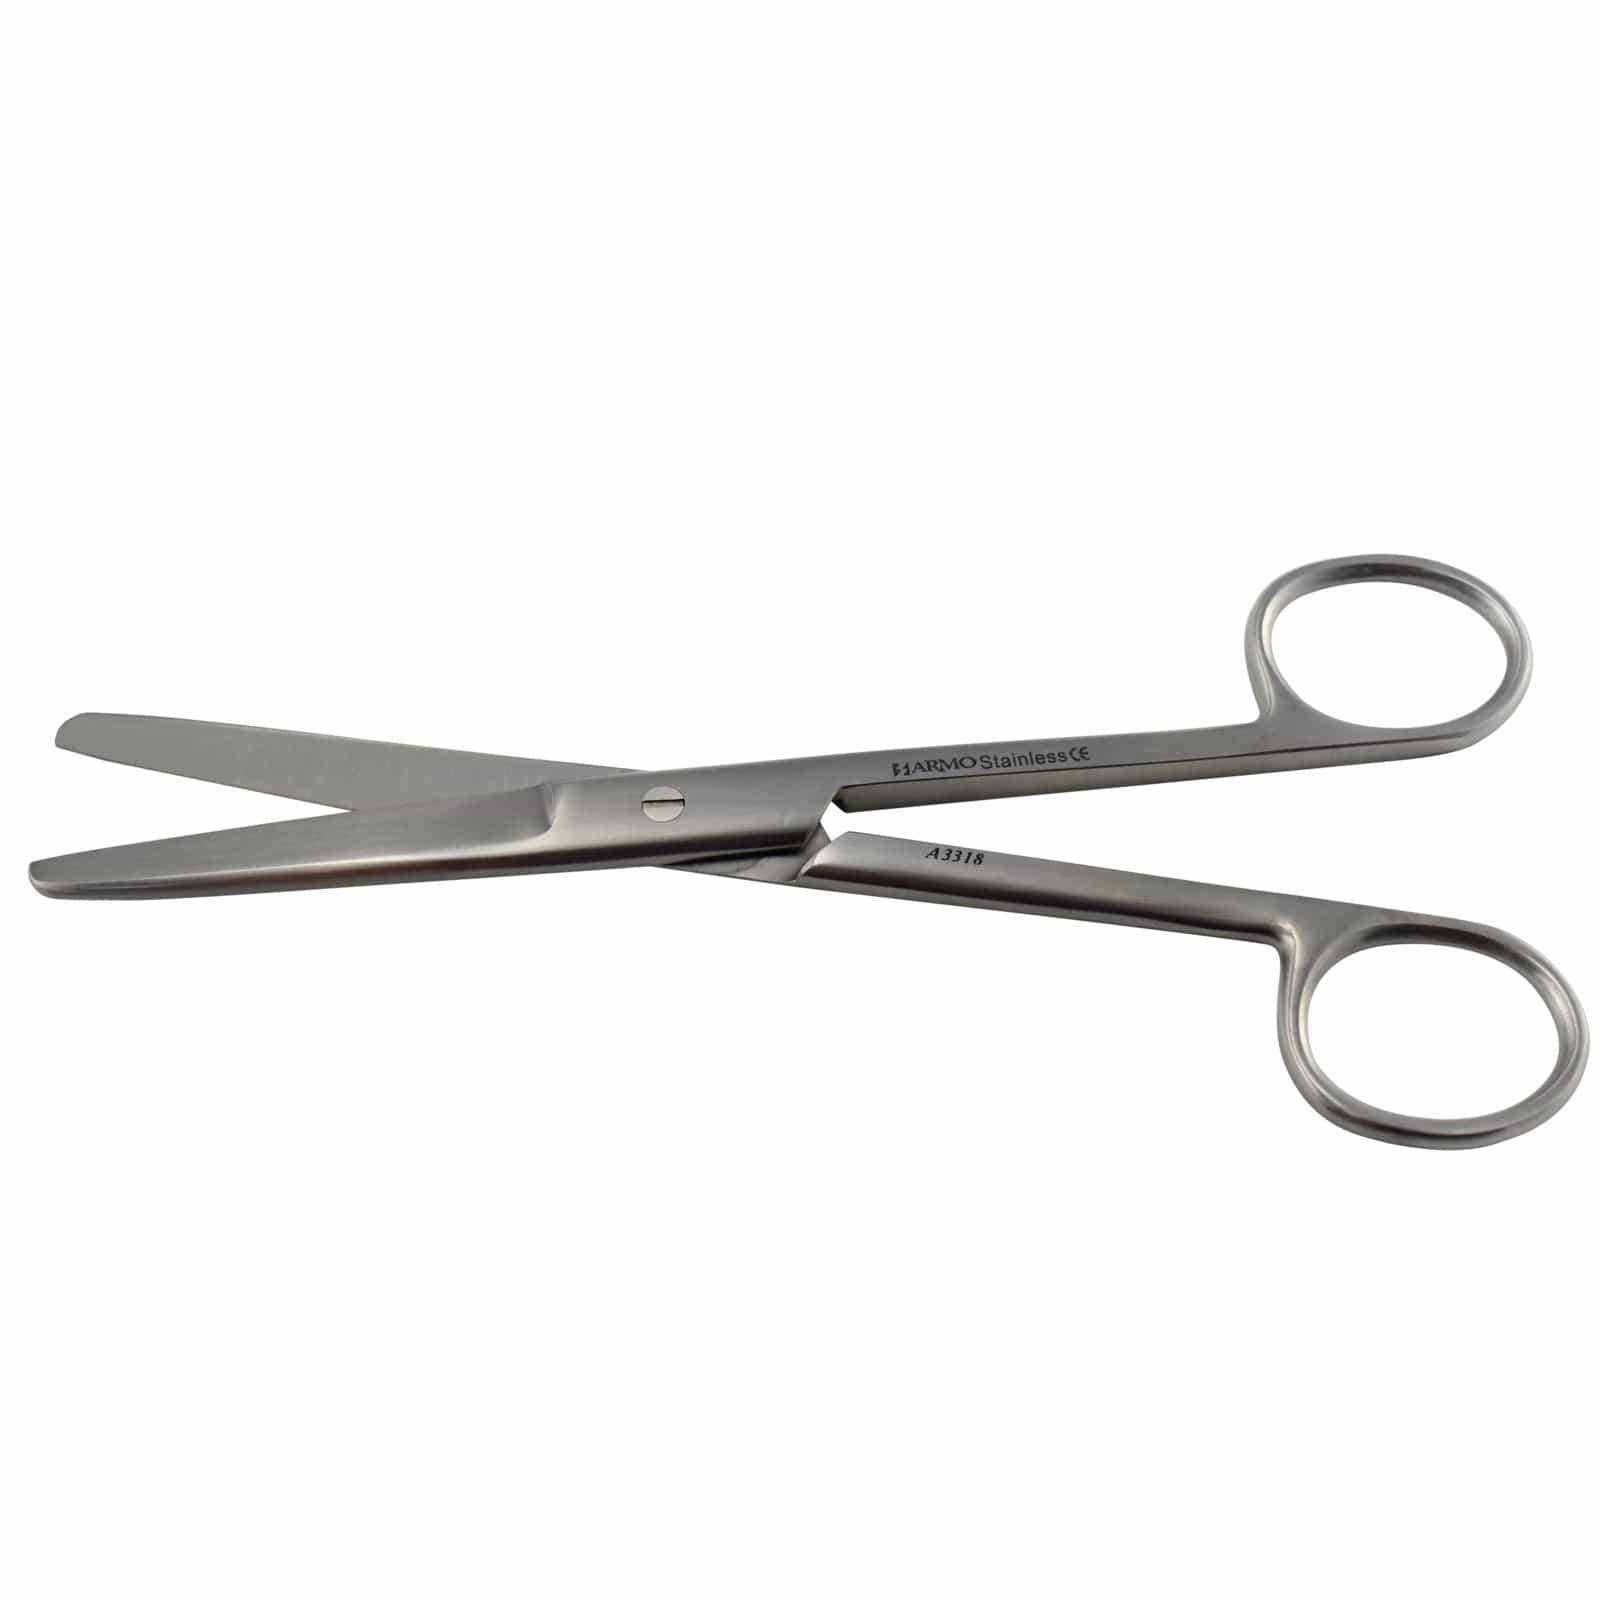 Armo Surgical Instruments 16cm / Straight / Blunt/Blunt Armo Surgical Scissors